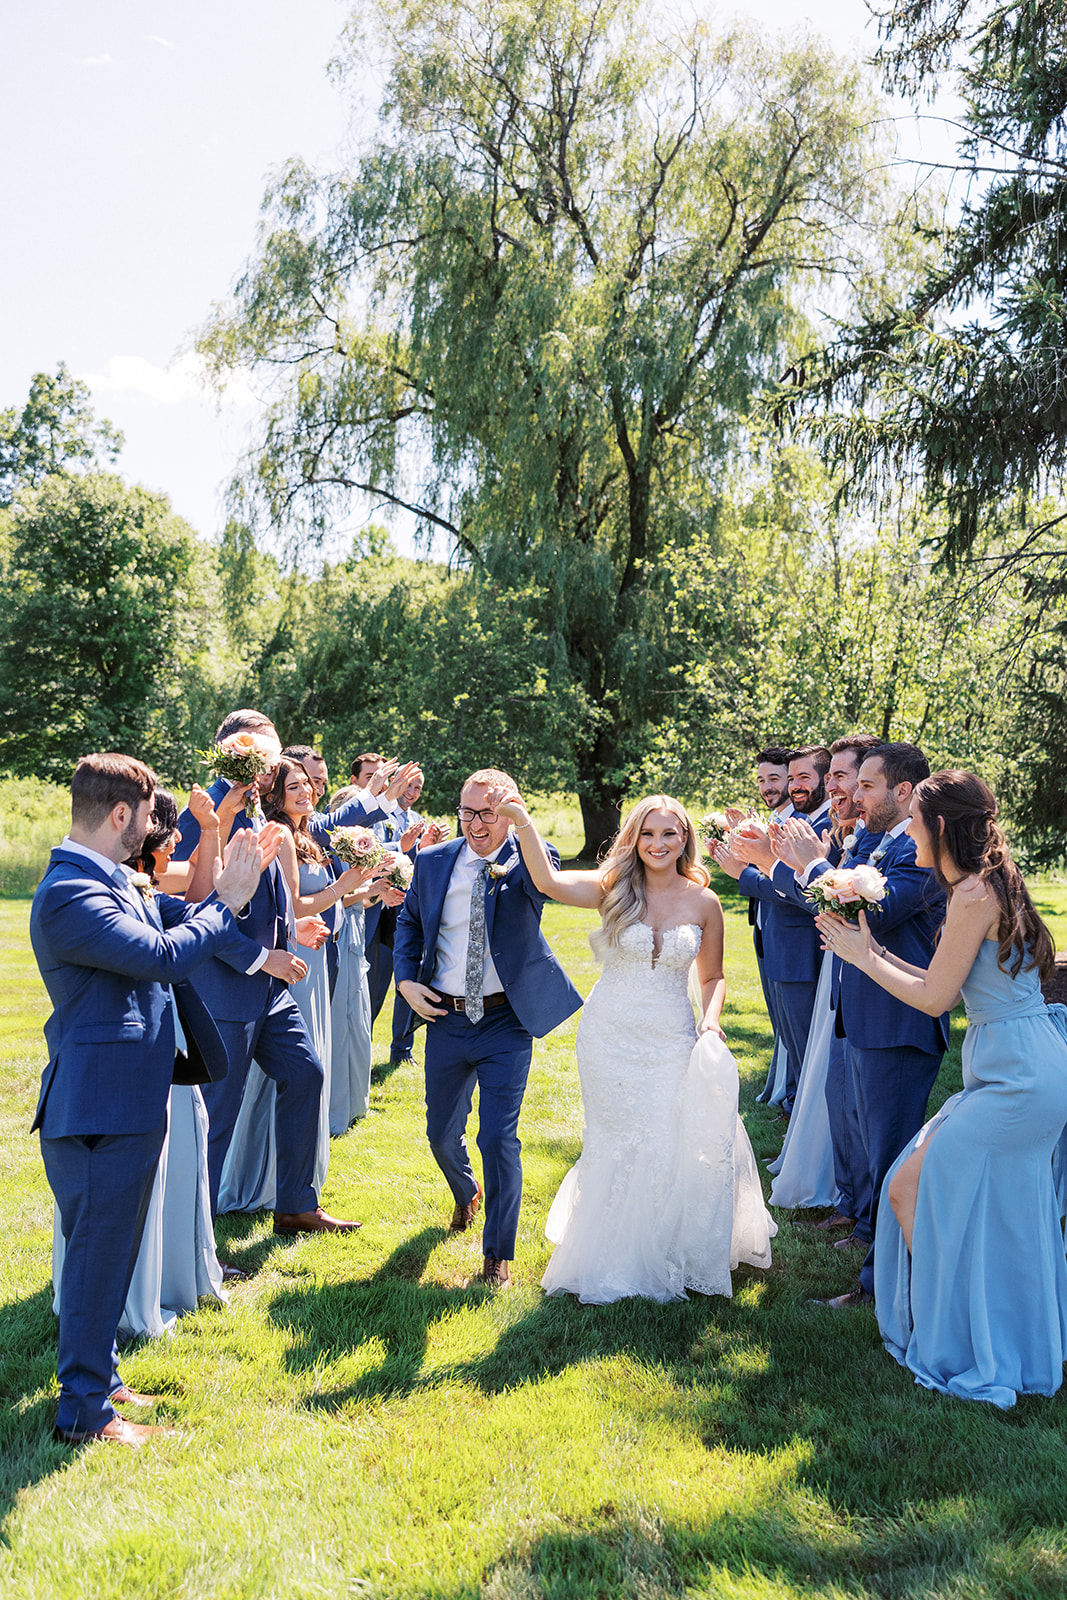 Newlyweds hold hands while walking through a path in a lawn made by their applauding wedding party